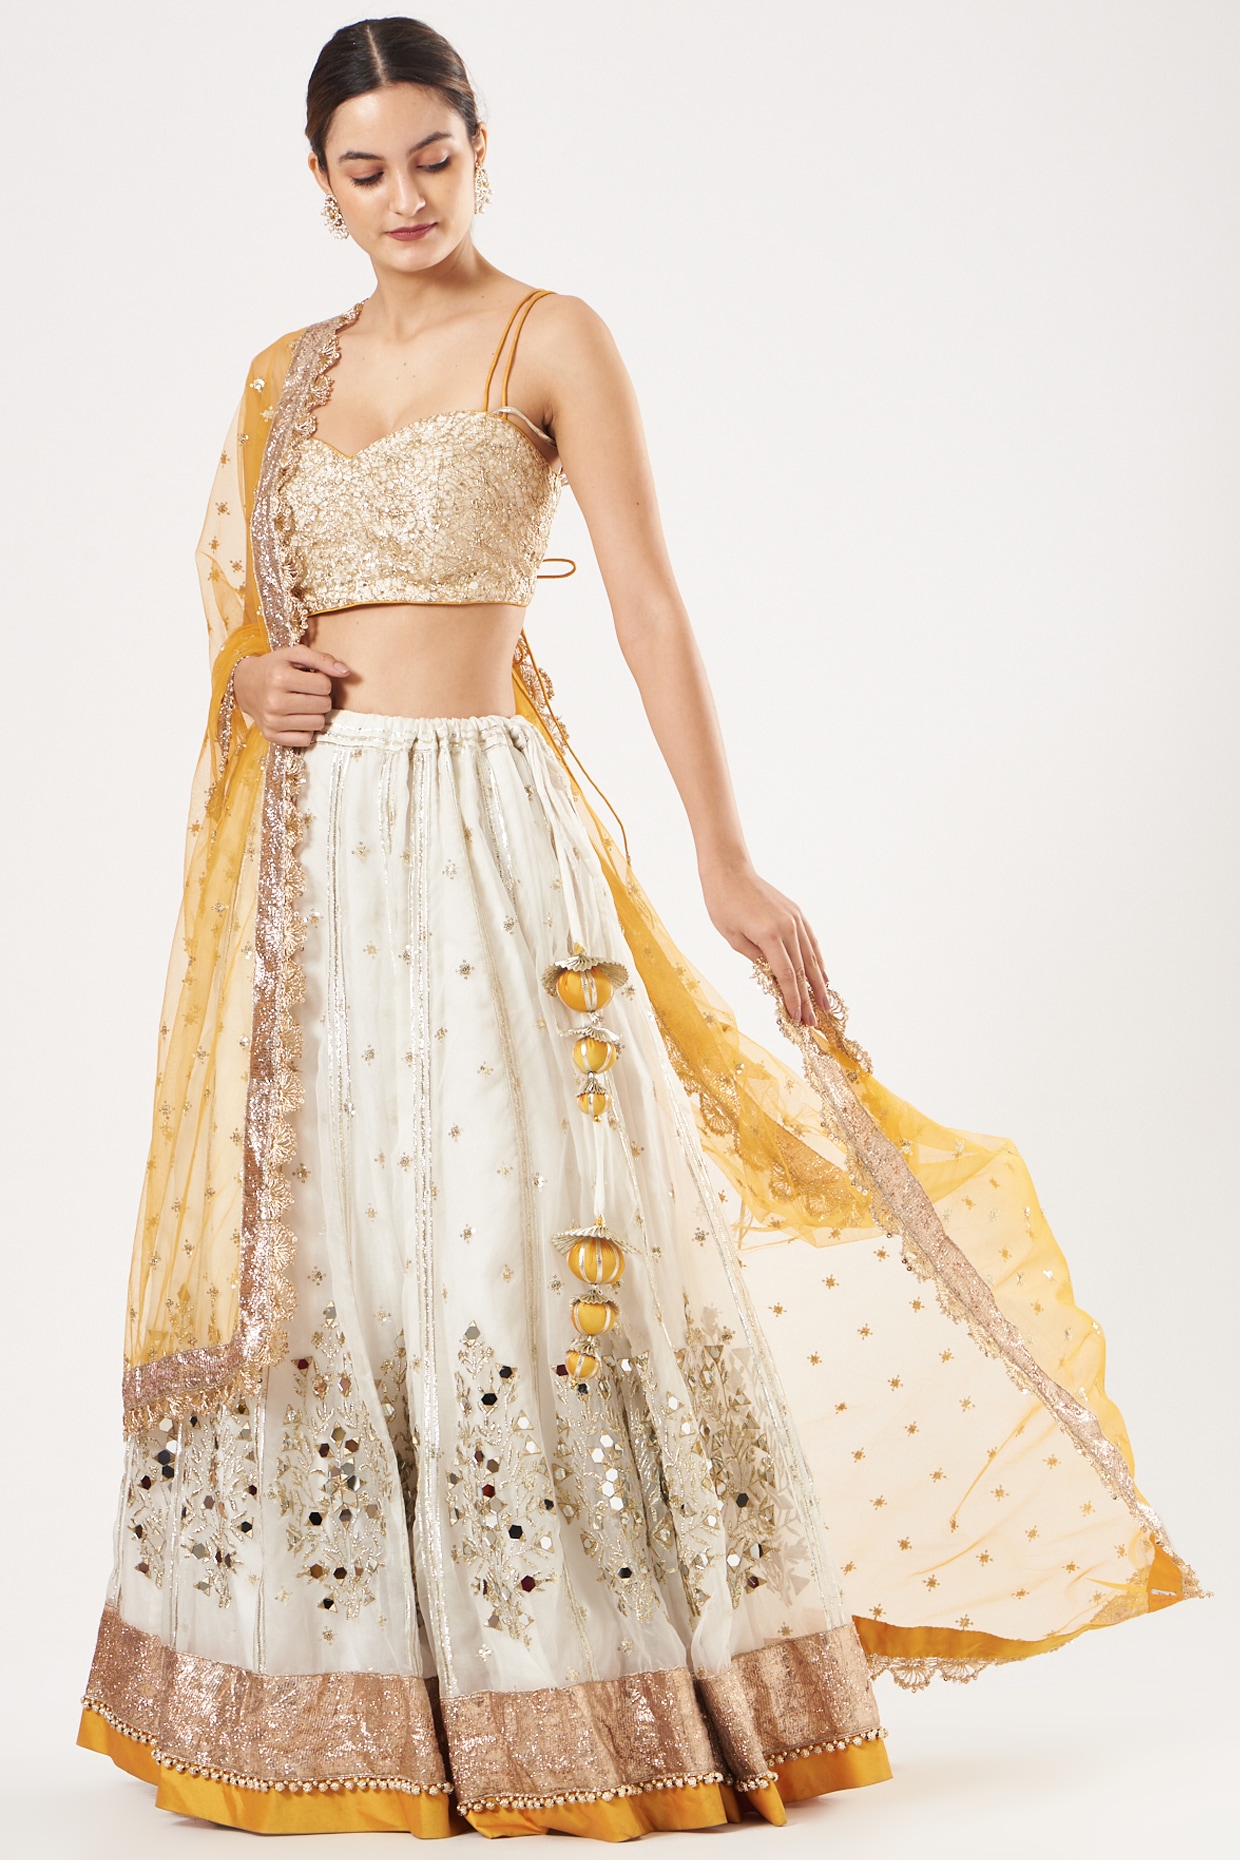 Article 🌸~NOOR~ Draped in elegance, this pristine white lehenga is adorned  with intricate details. The choli sparkles with Swarovski, ... | Instagram